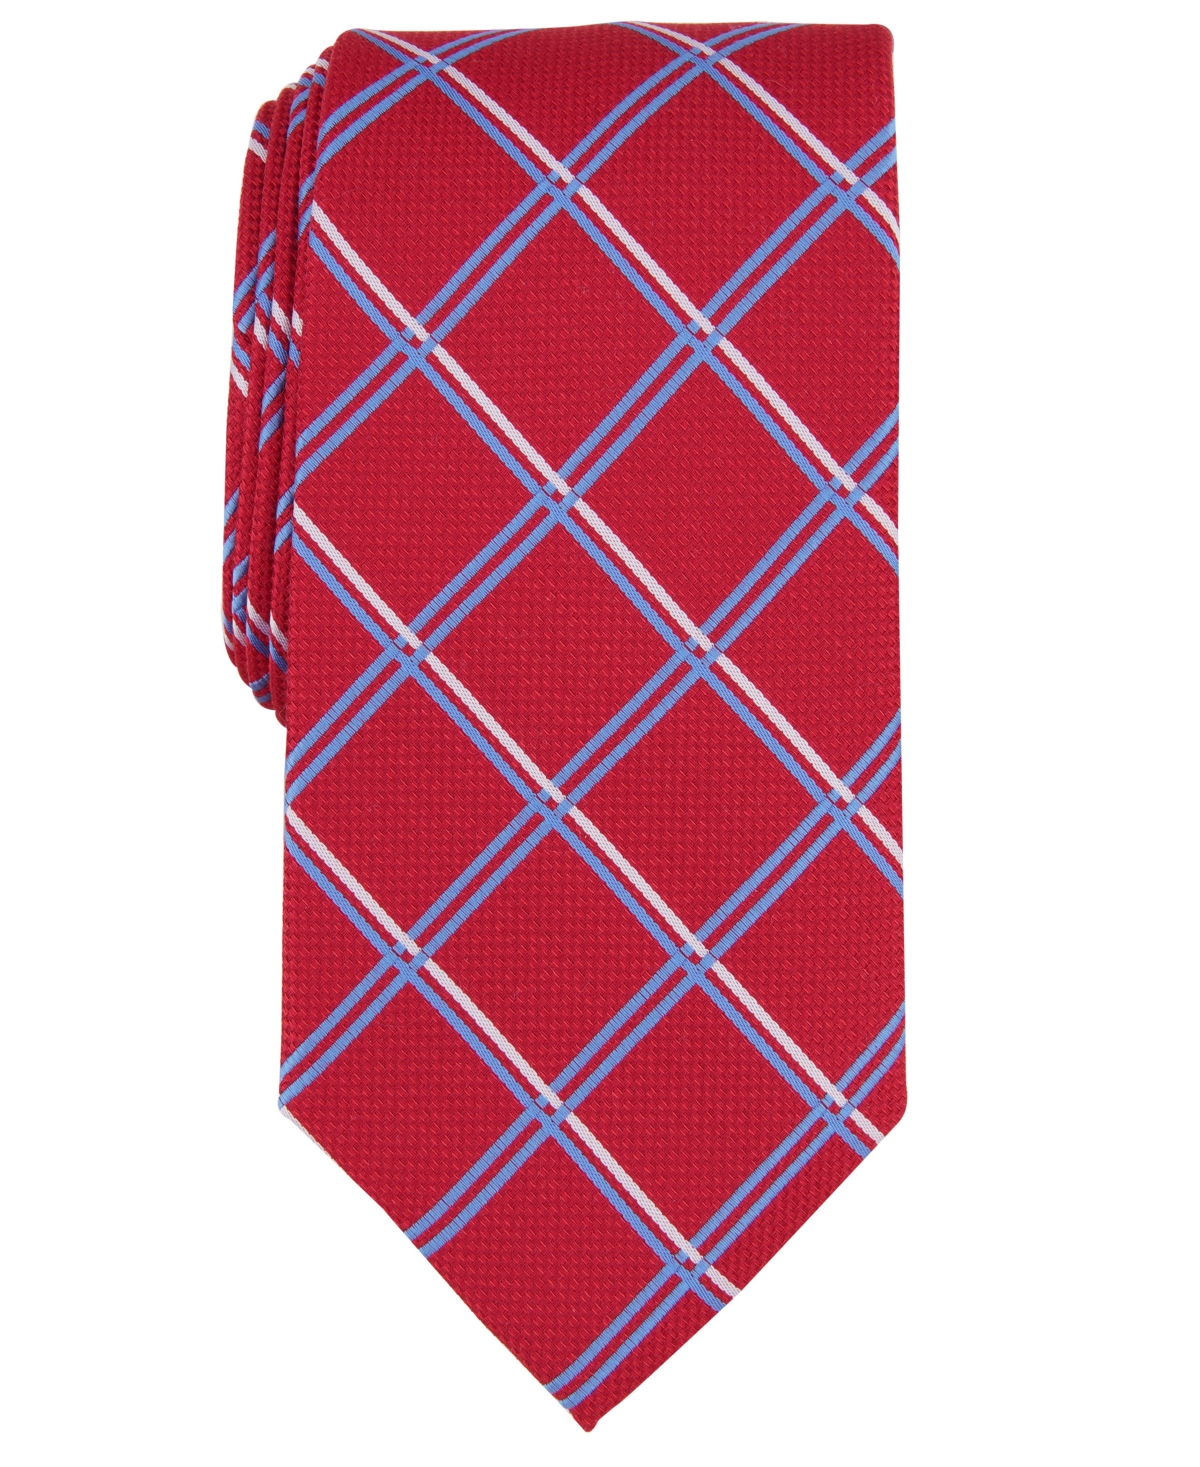 Men's Adobe Grid Tie, Created for Macy's - Red